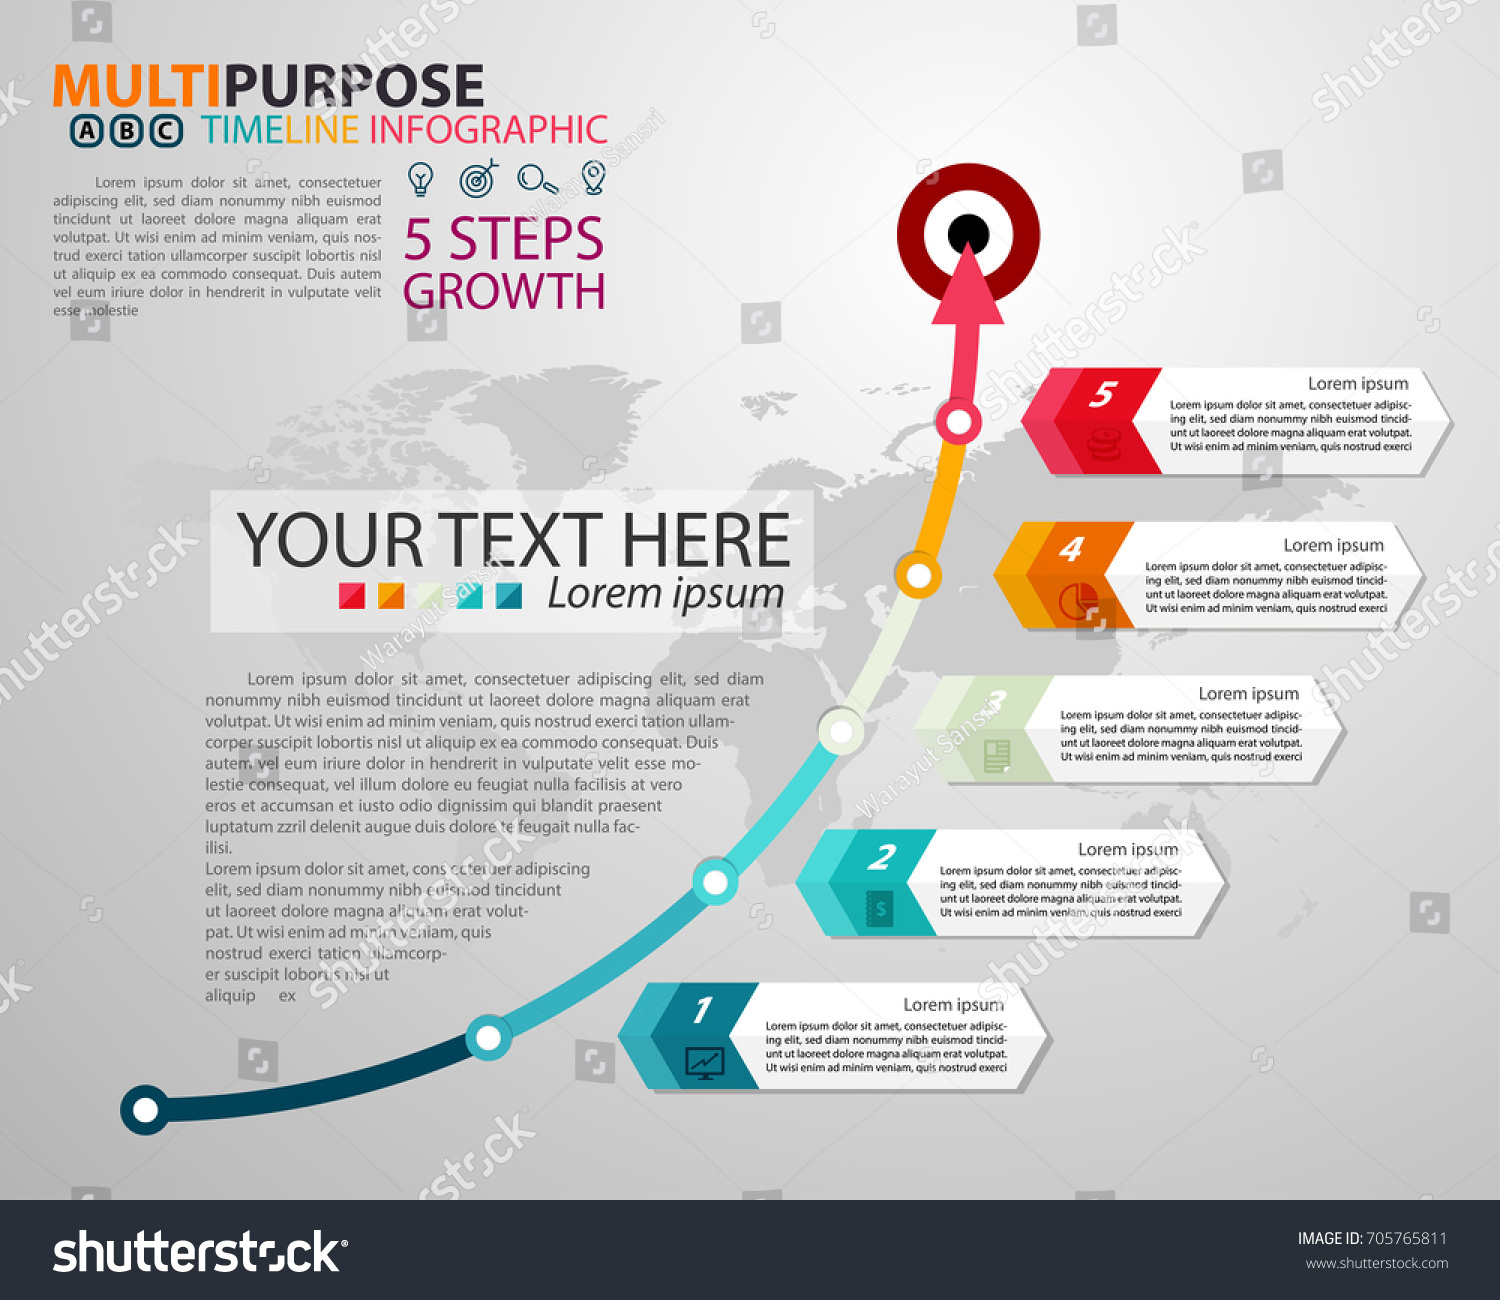 Infographic Timeline Template from image.shutterstock.com